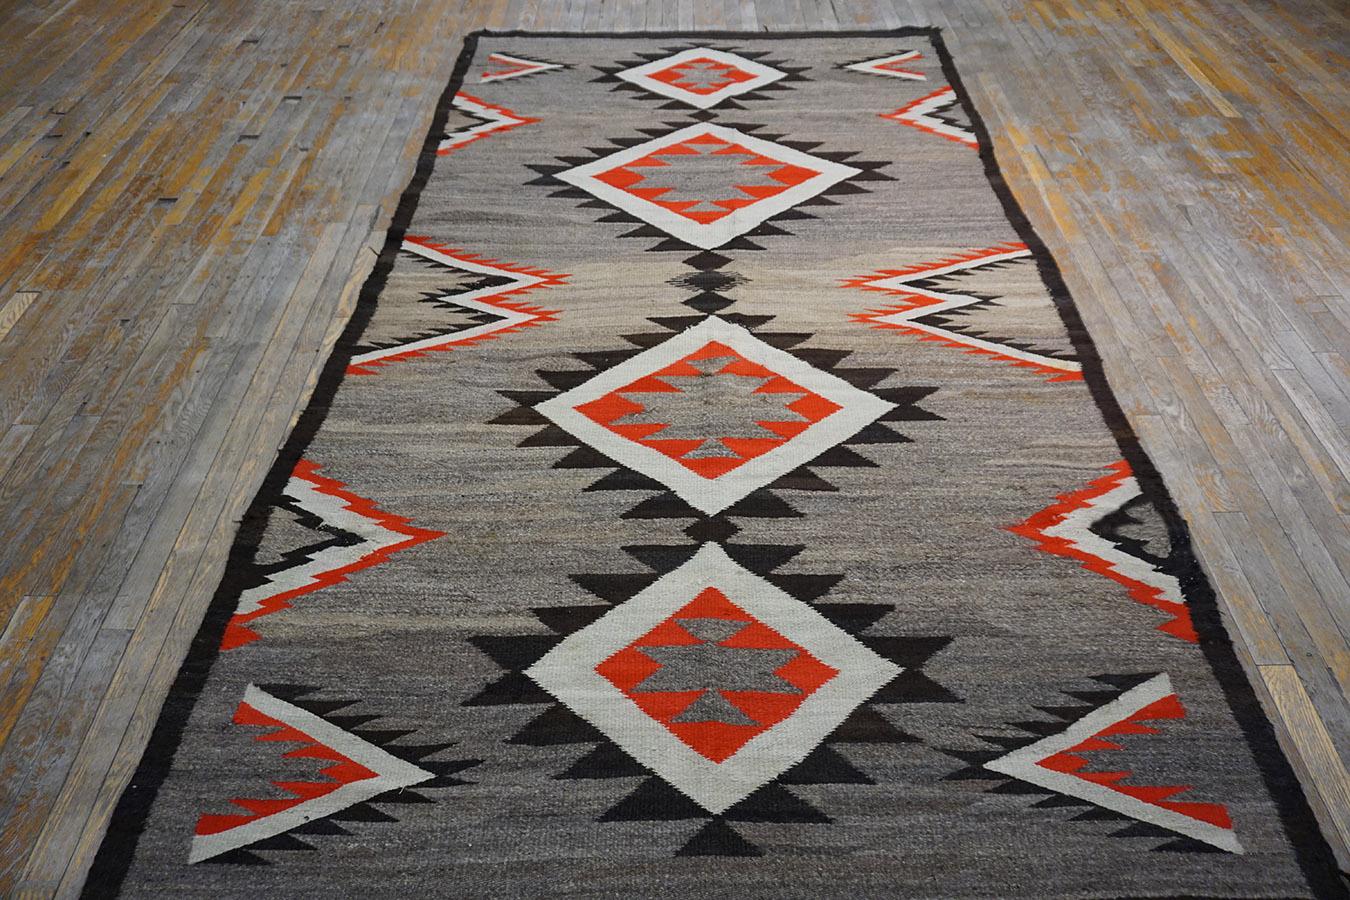 Hand-Woven Early 20th Century American Navajo Carpet ( 5'6